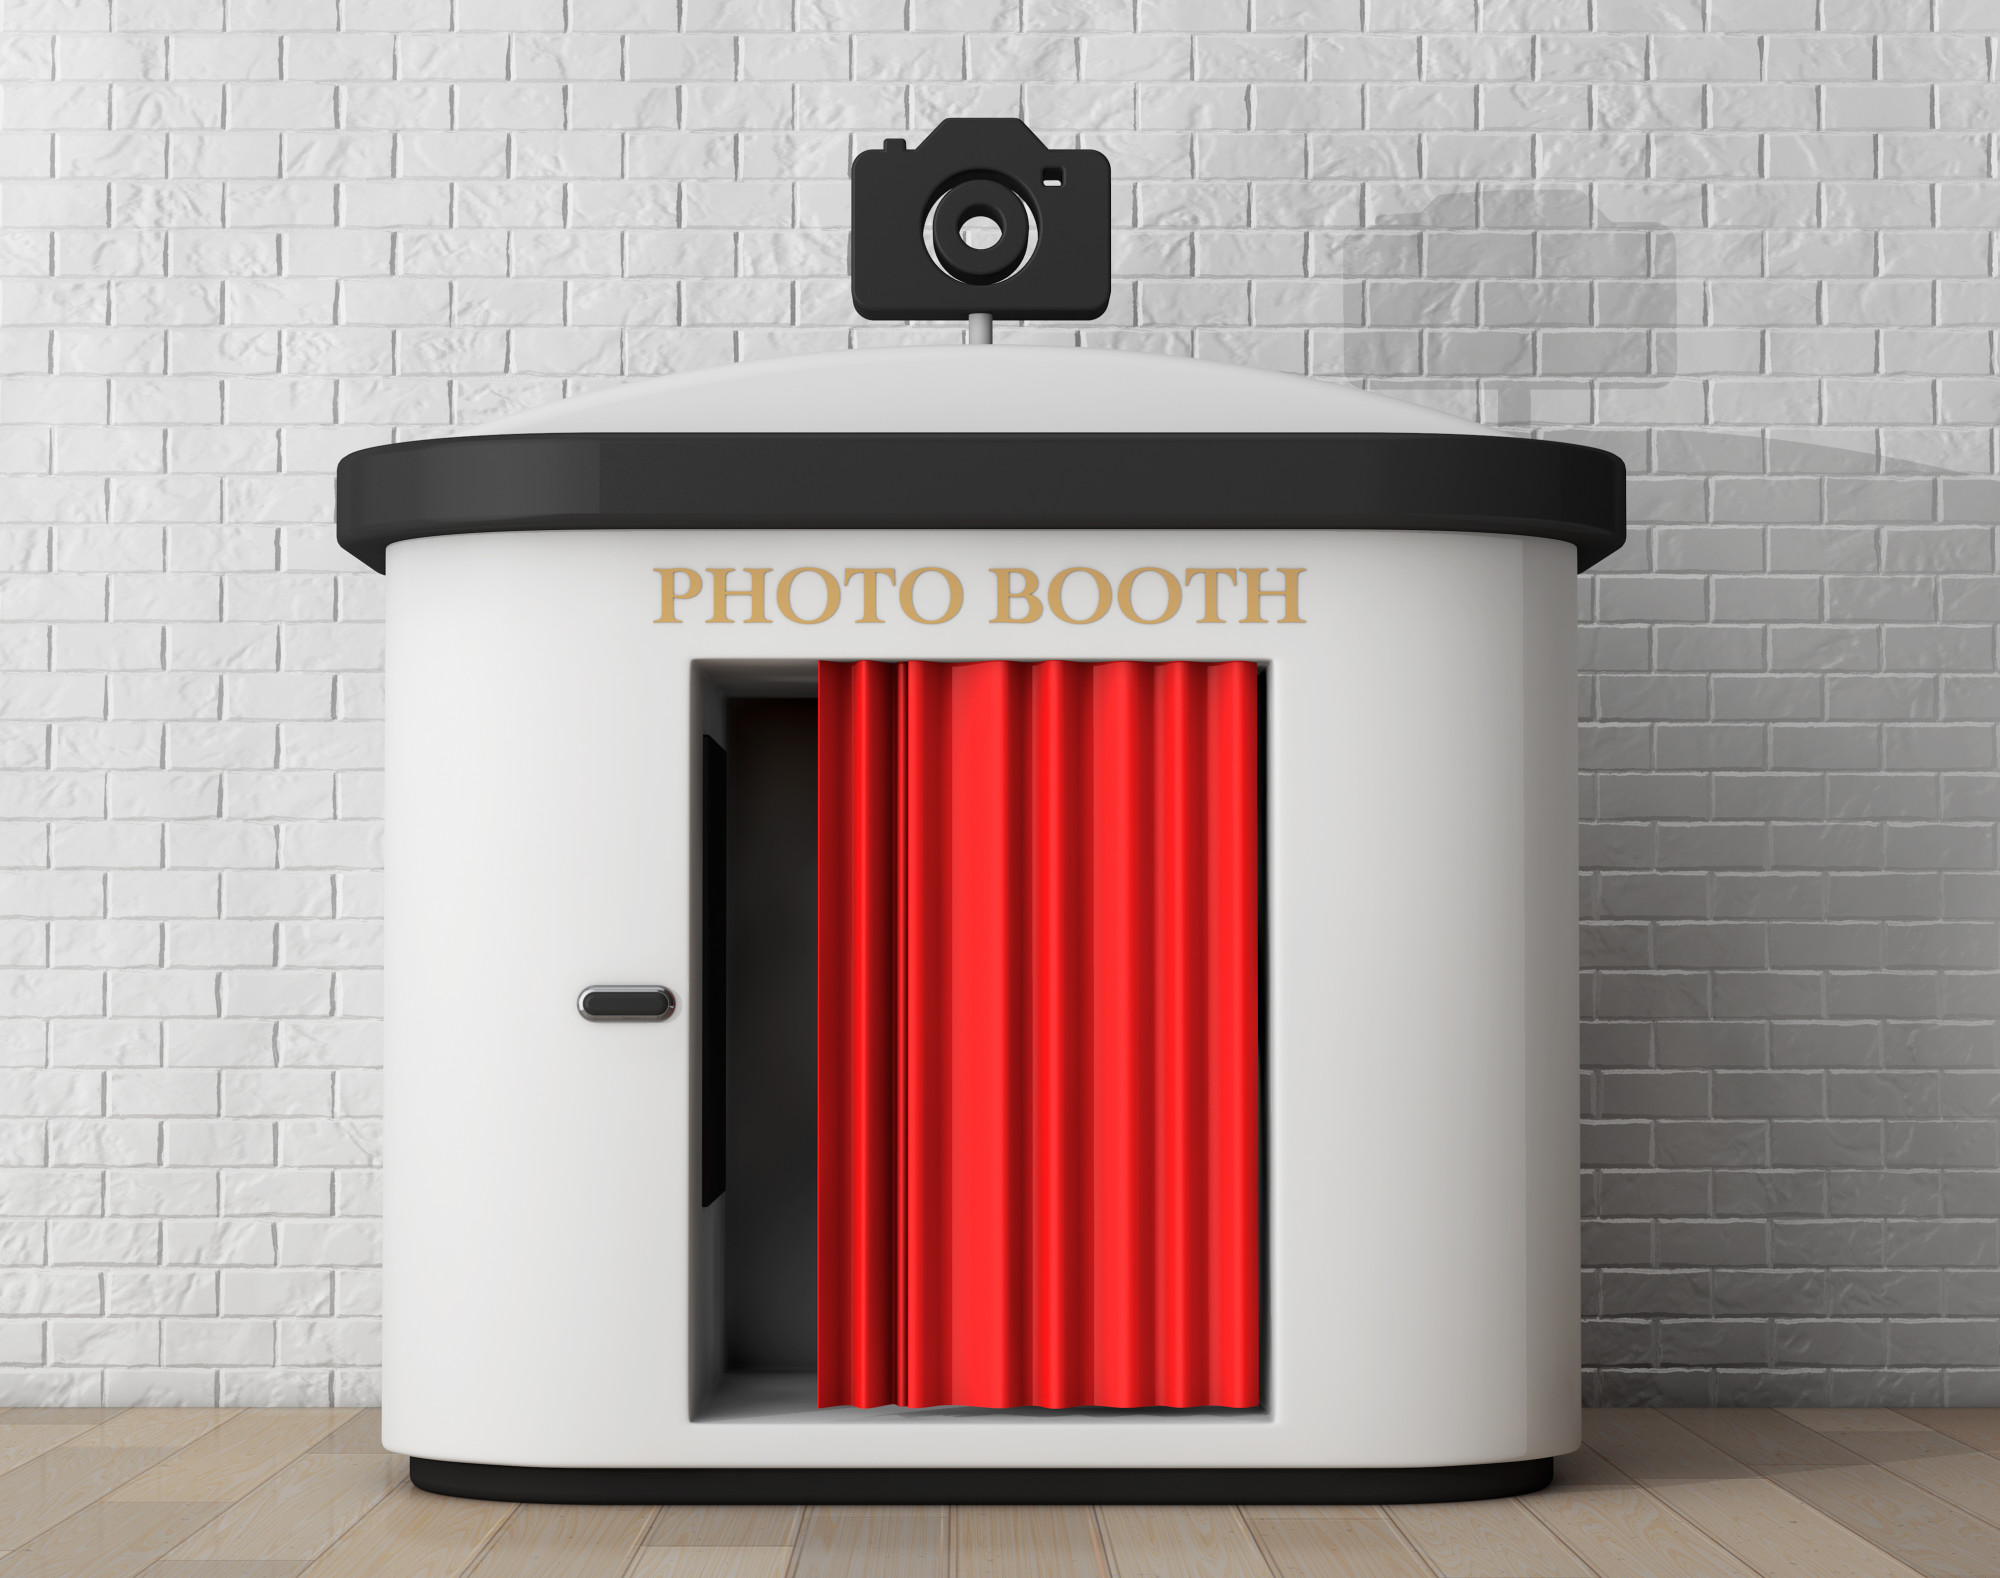 image 1 - Top 5 Ways To Grow Your Photo Booth Rental Business - photo-booth-news